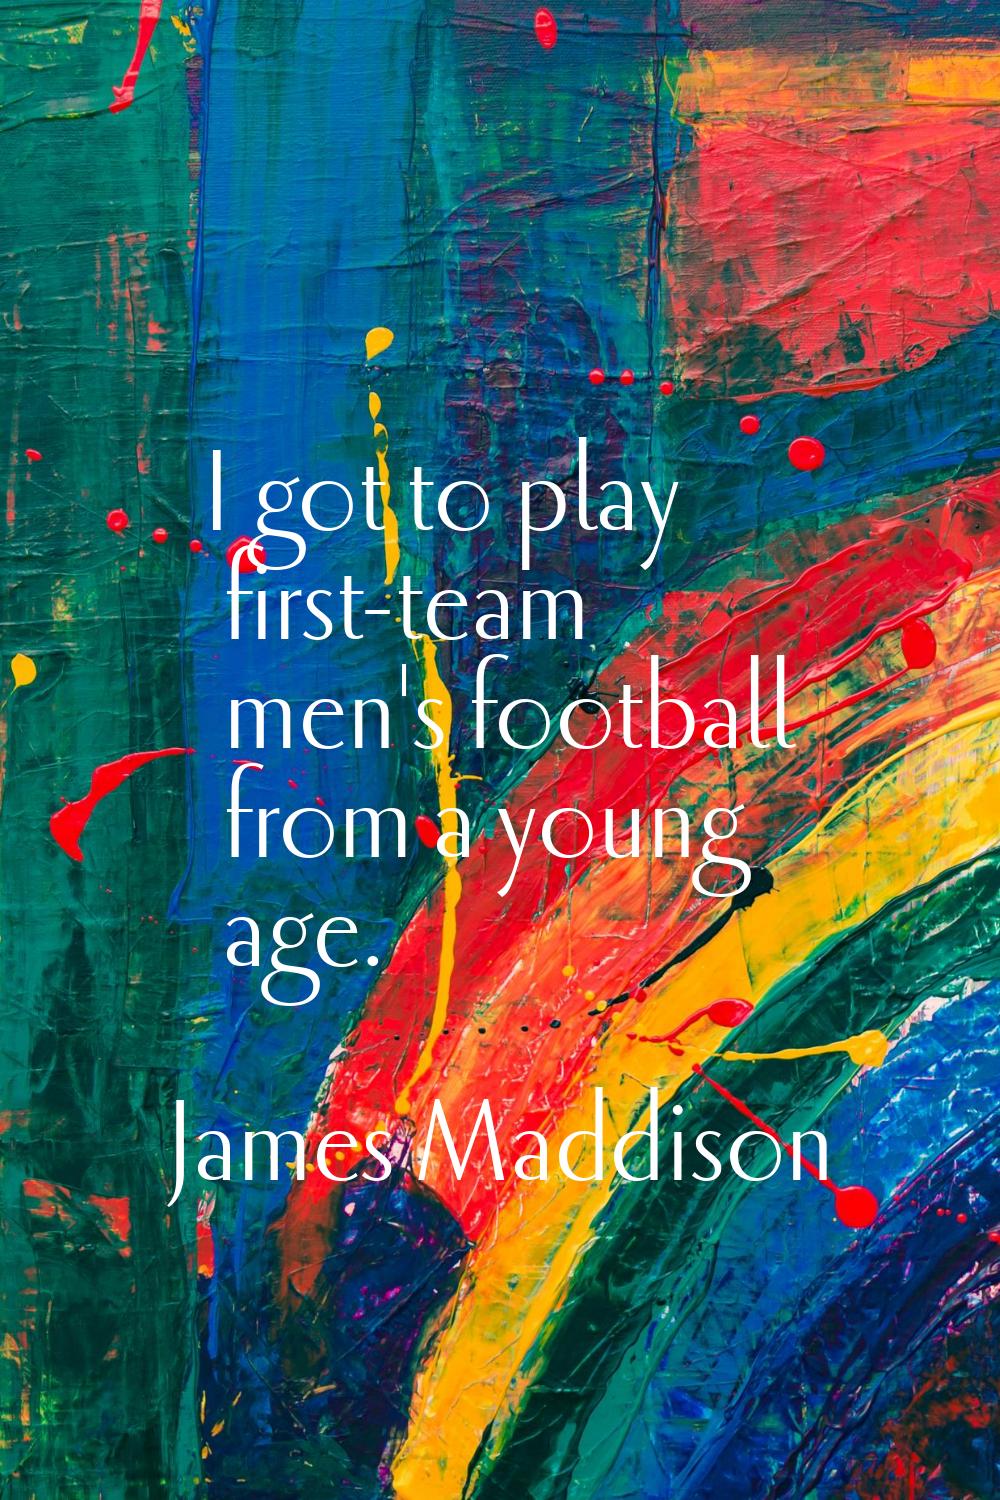 I got to play first-team men's football from a young age.